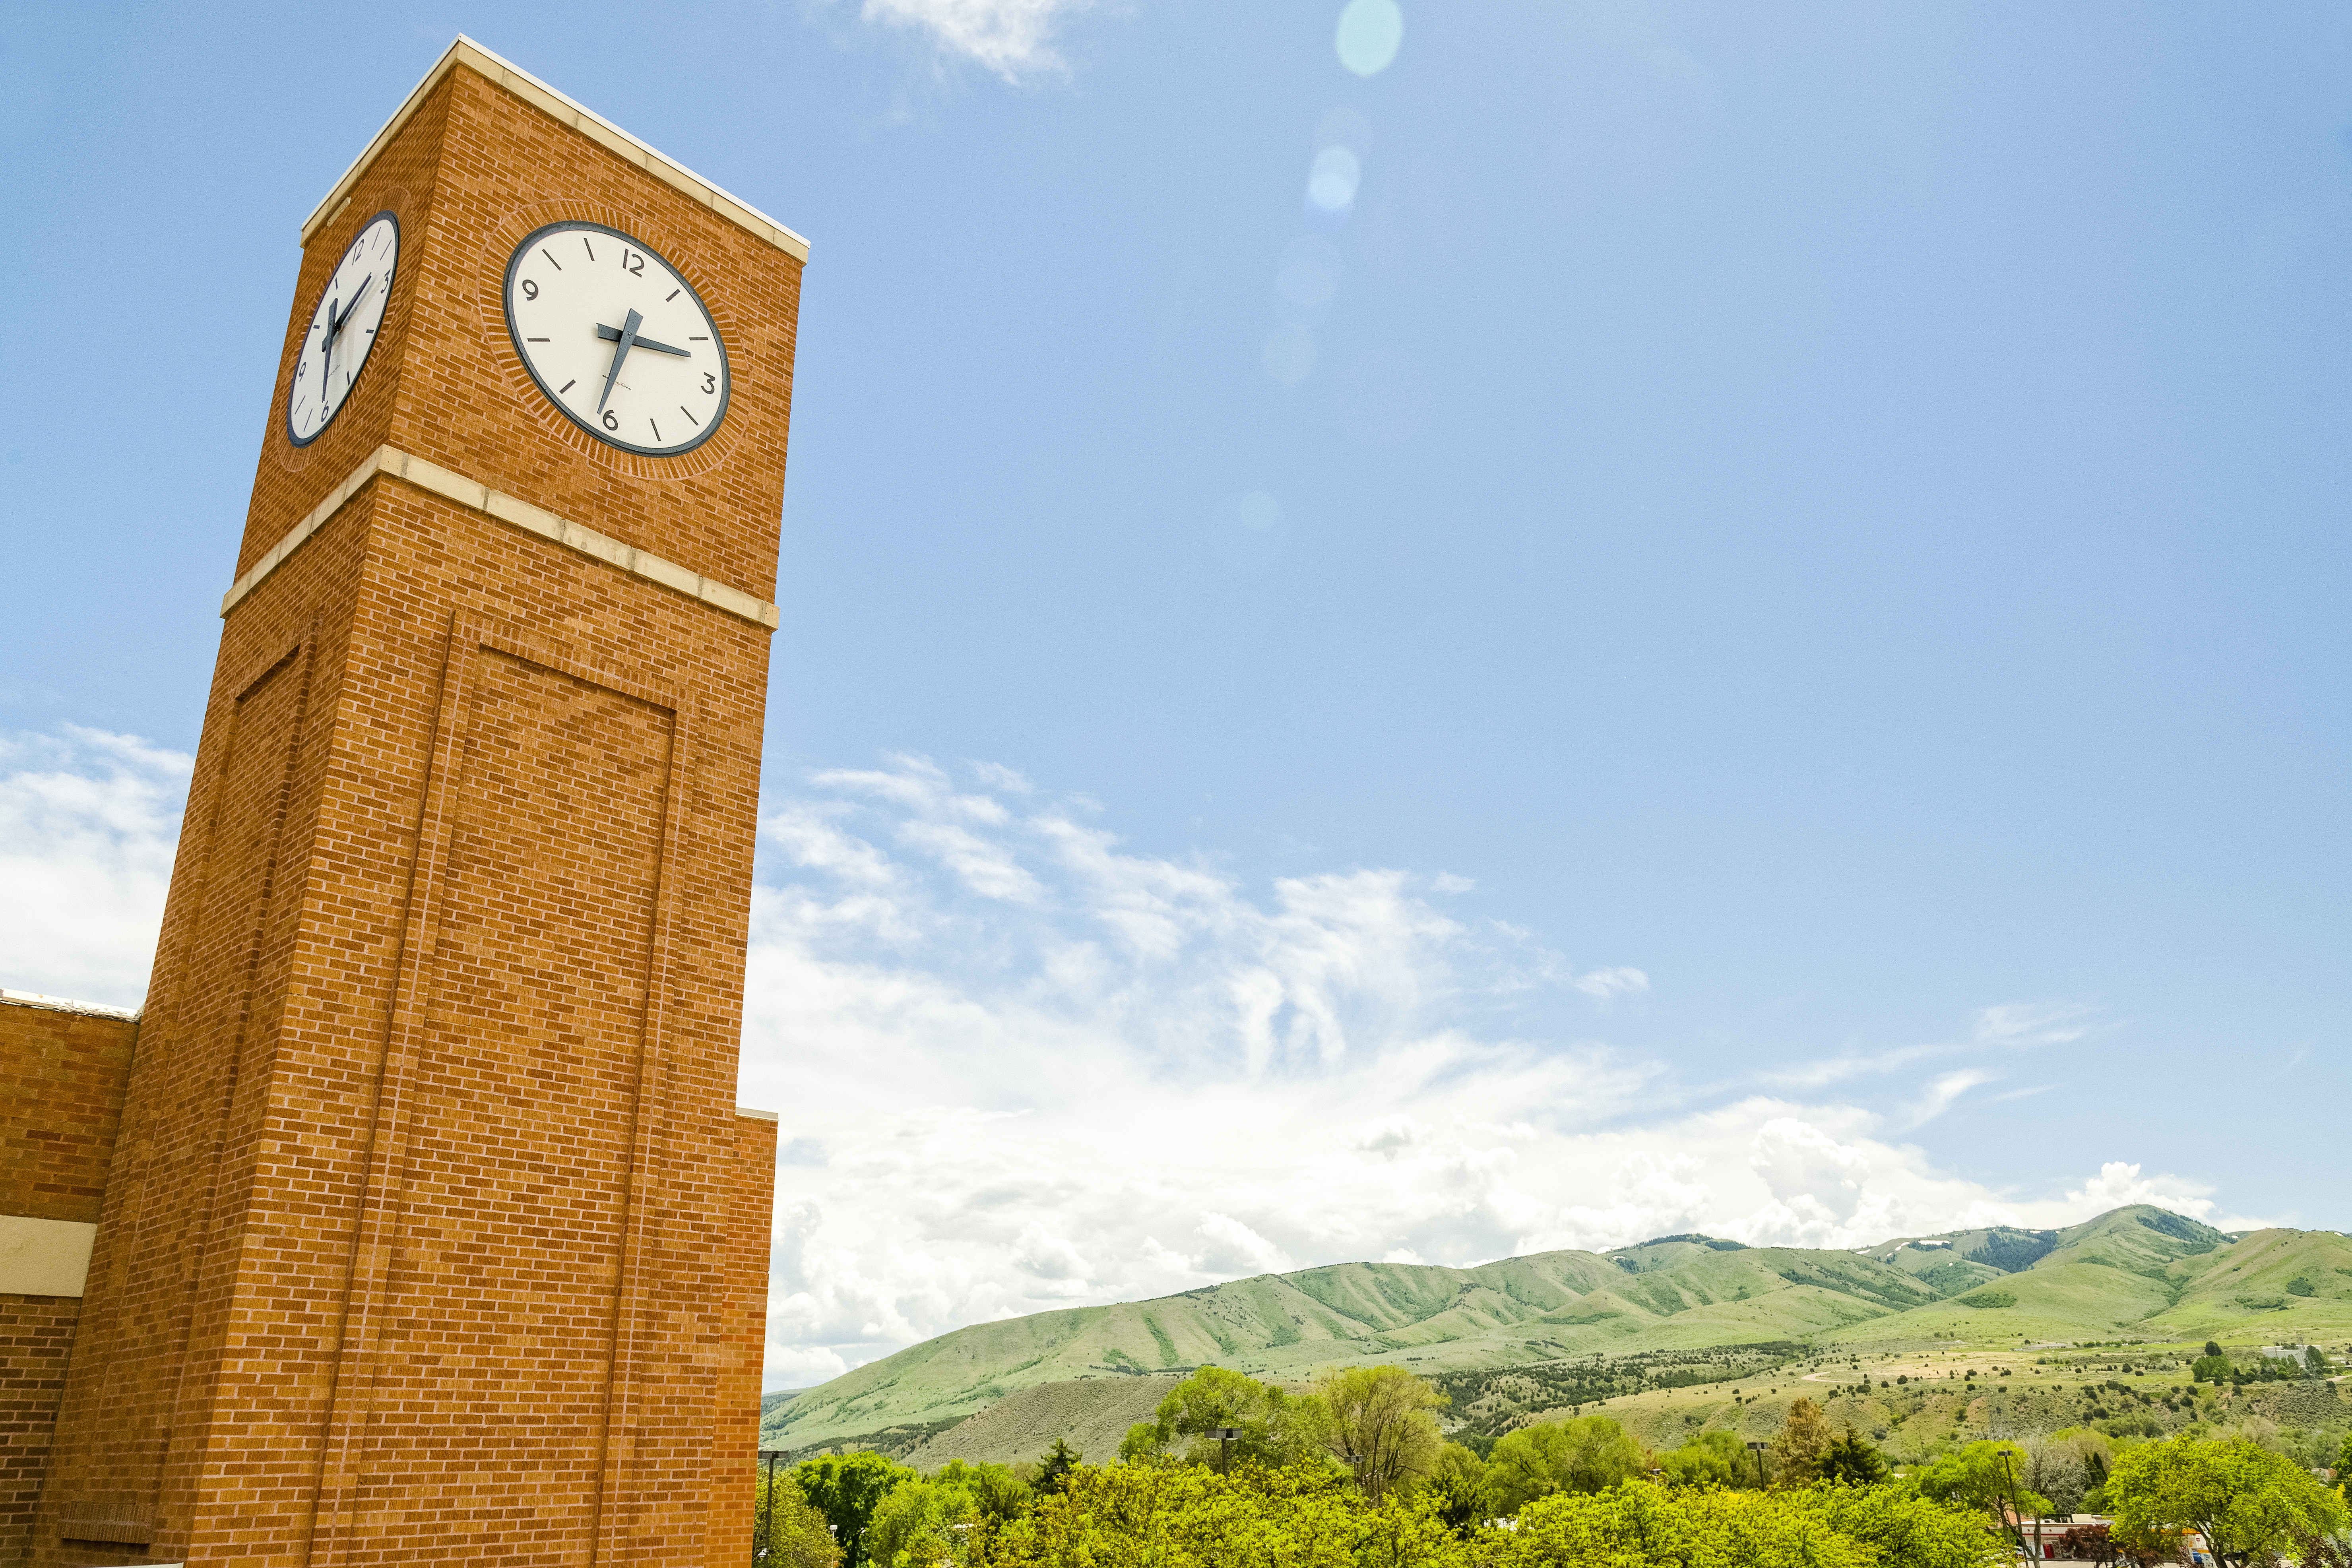 A view of the Student Union Building clocktower.